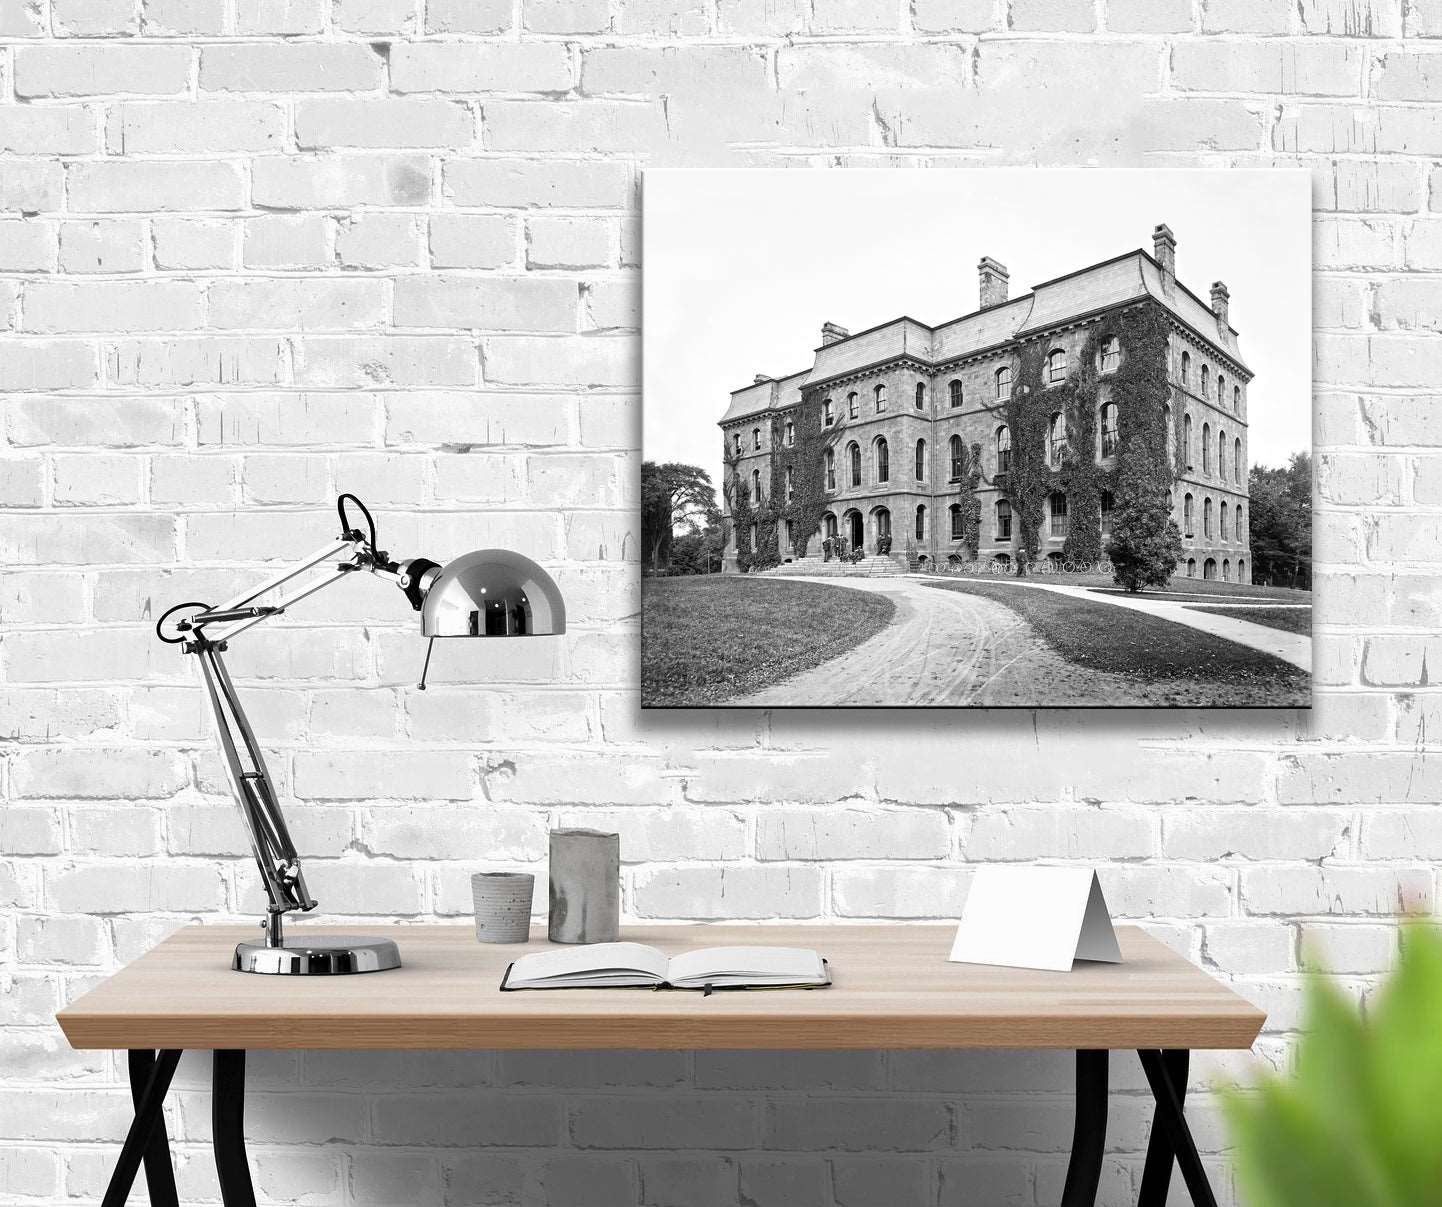 A canvas print hanging on a brick wall, featuring a vintage photograph of the University of Rochester